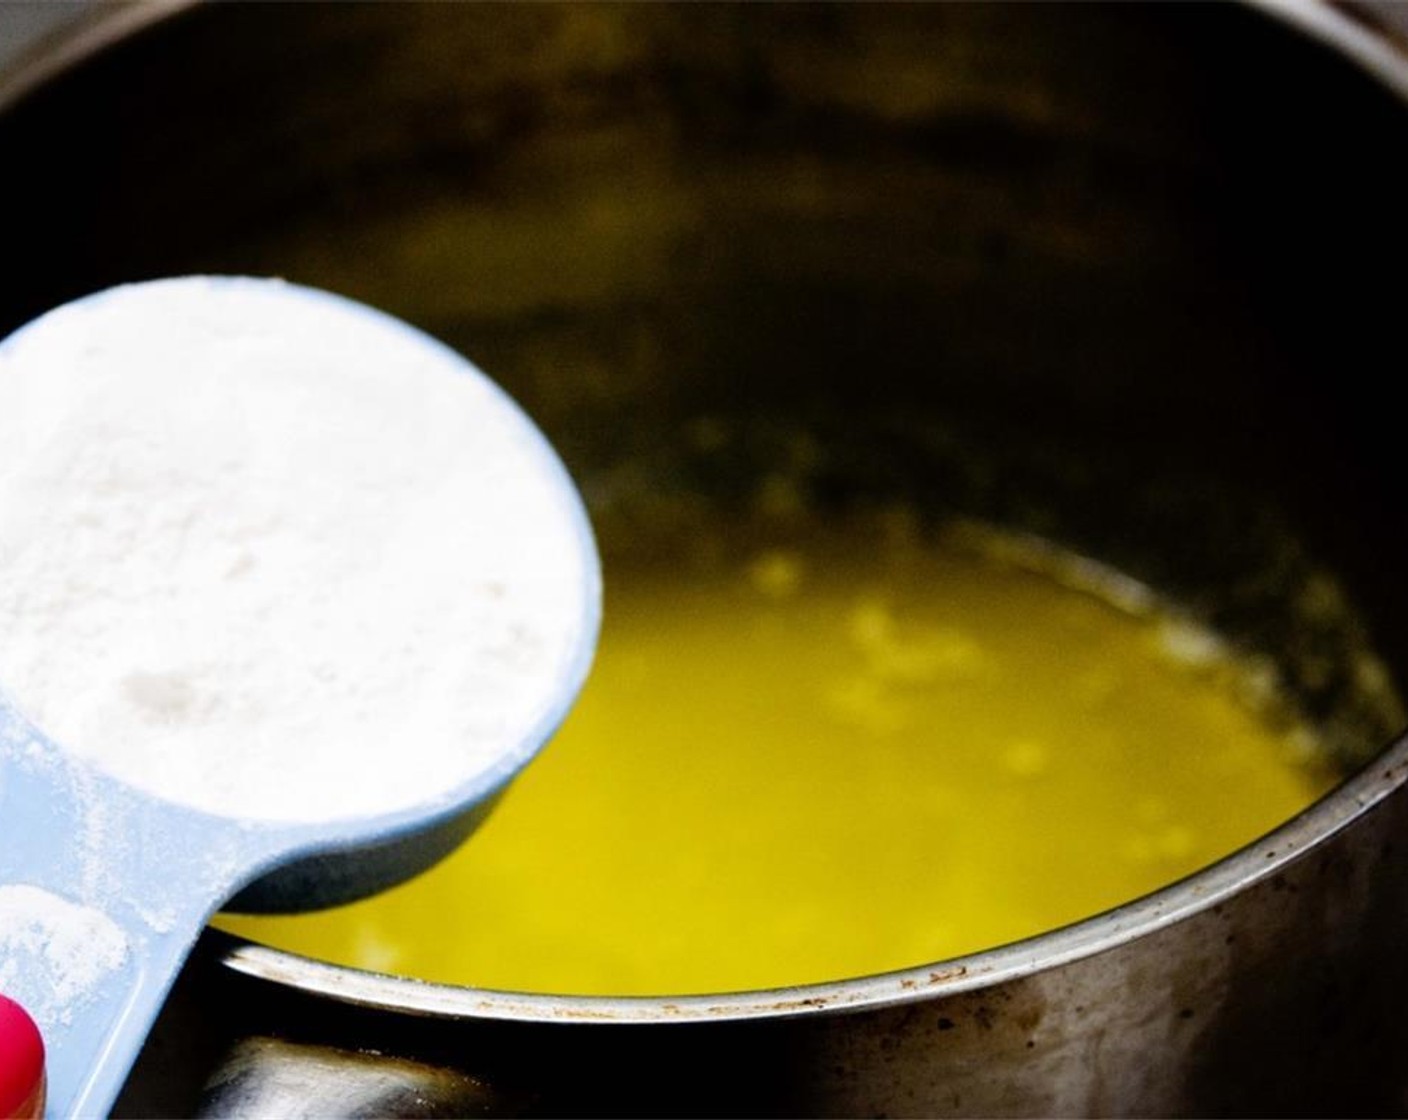 step 1 To make Bechamel Sauce: In a pot, melt the Butter (3 1/2 Tbsp). Remove from heat, and pour in All-Purpose Flour (1/3 cup). Mix until you get a smooth paste. Allow it to cook over heat for two minutes to cook out the flour taste from the roux, while you stir.